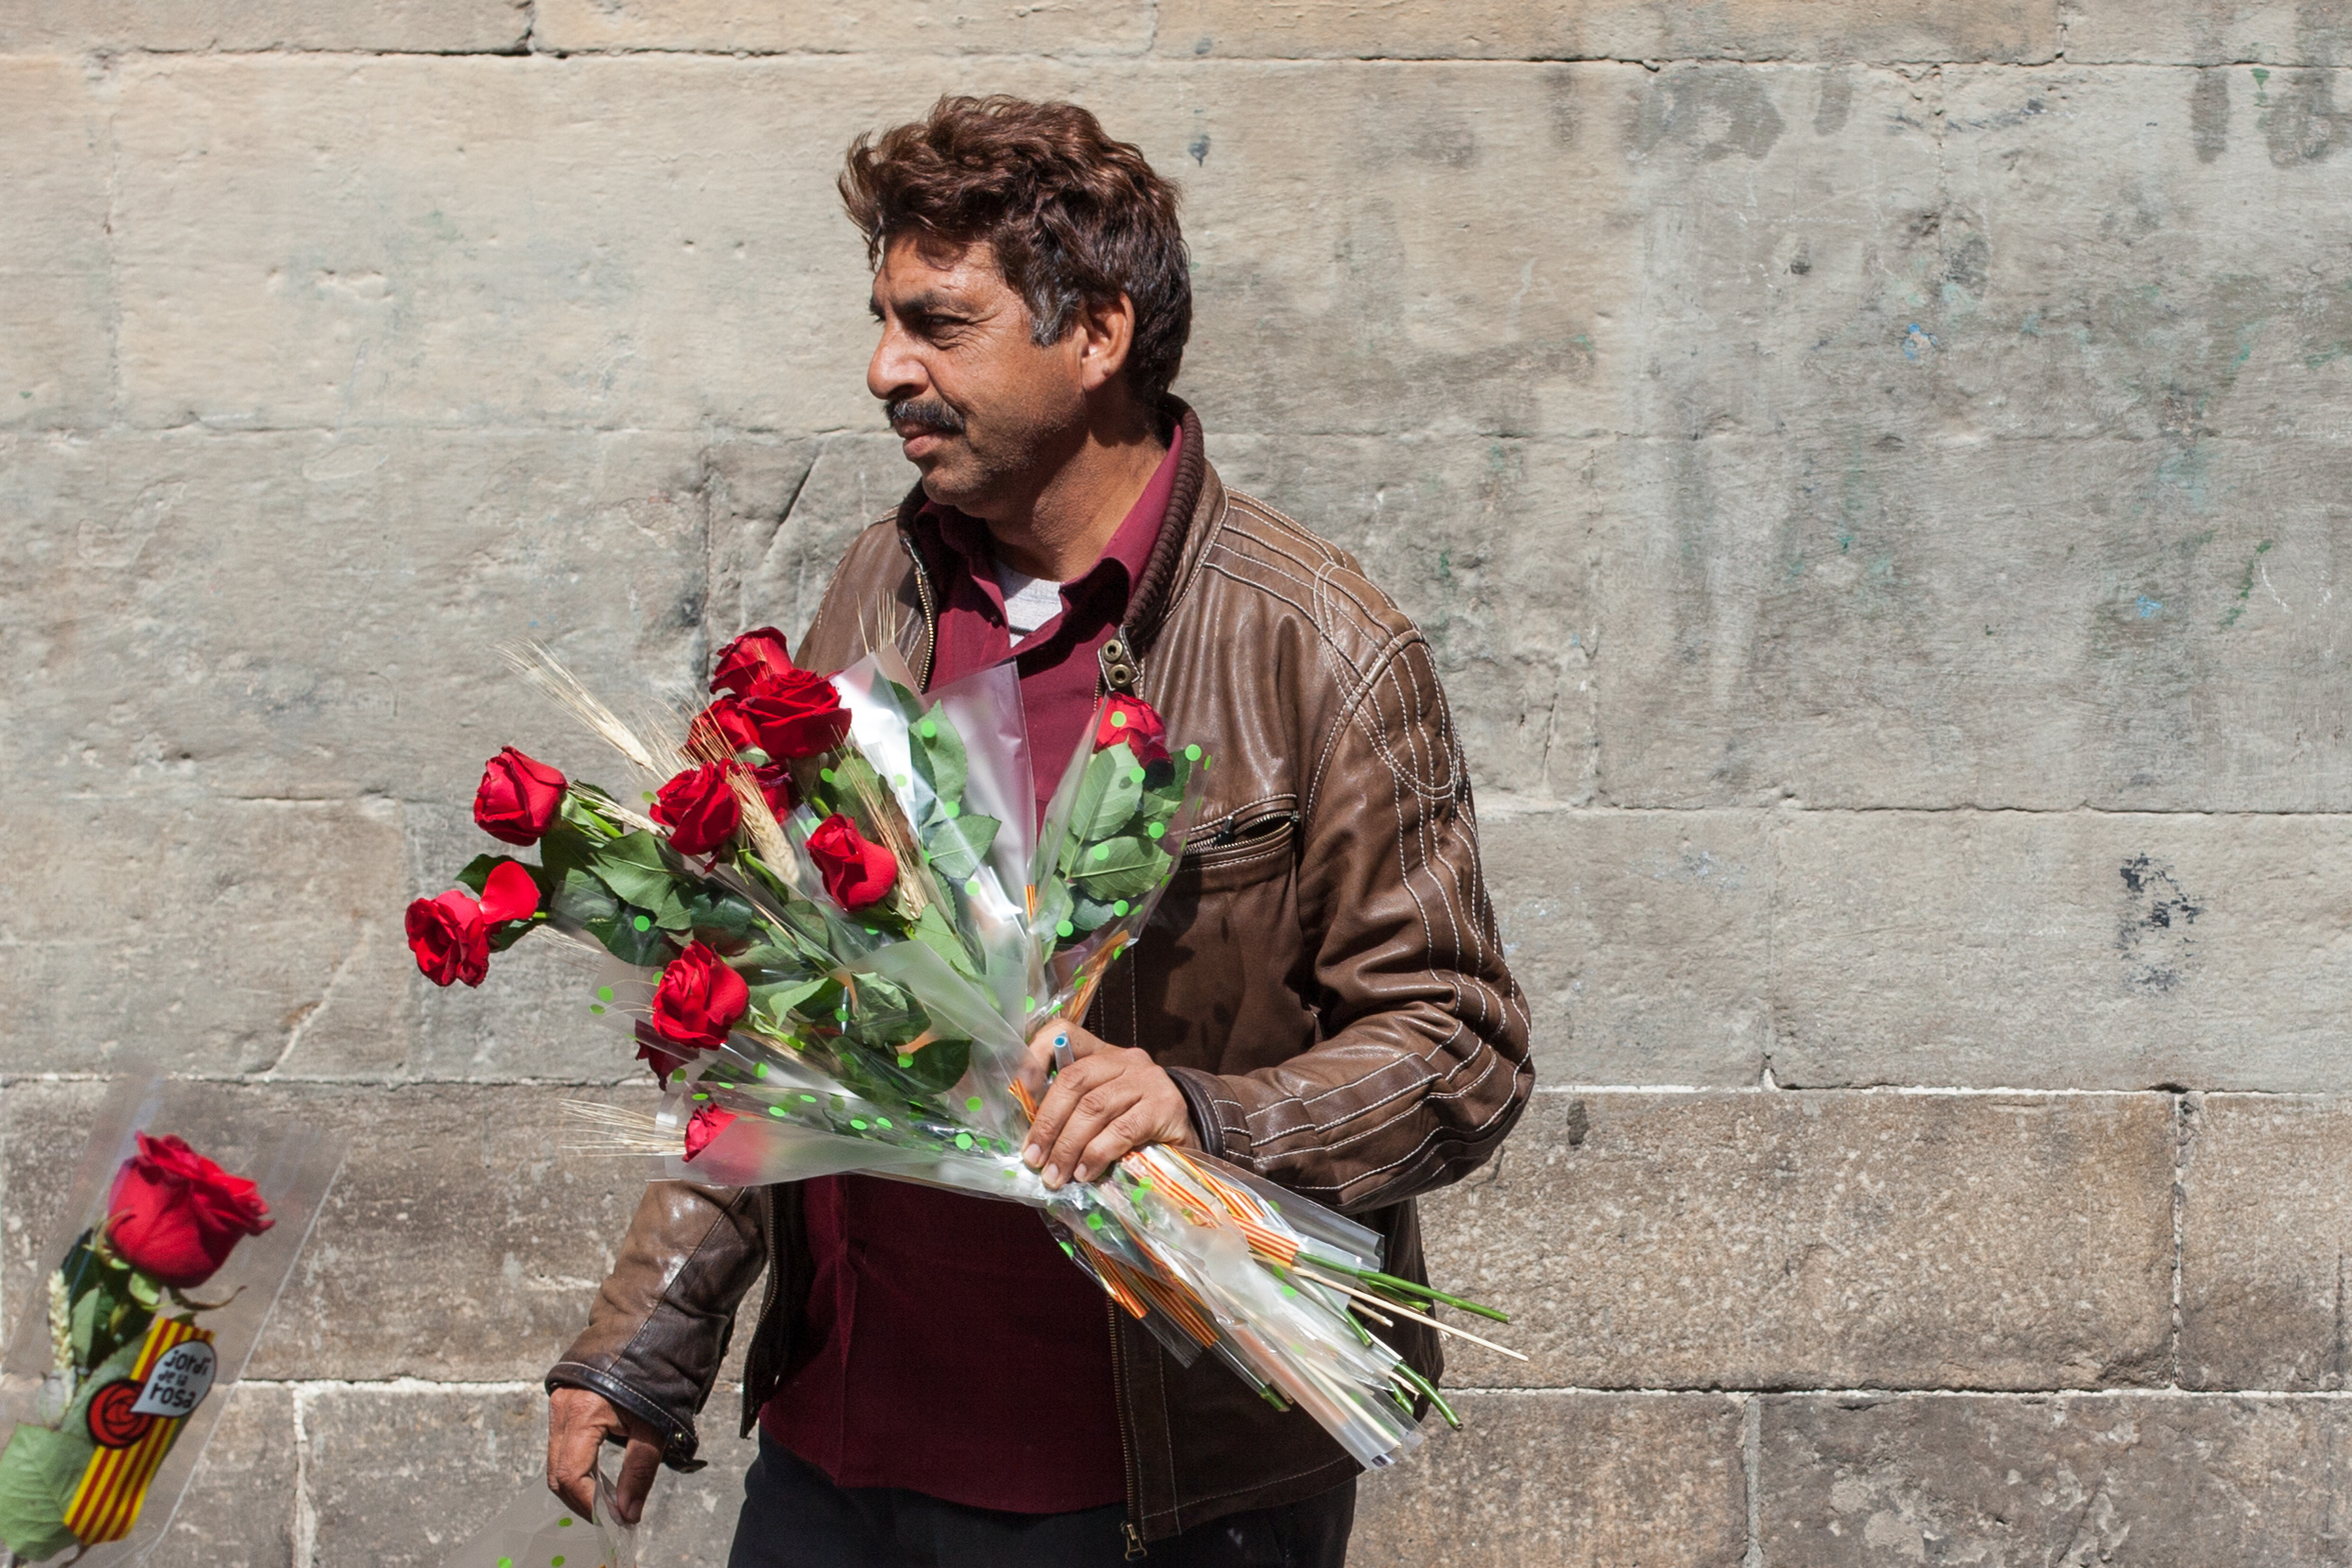 A man sells flowers on the streets of Barcelona.